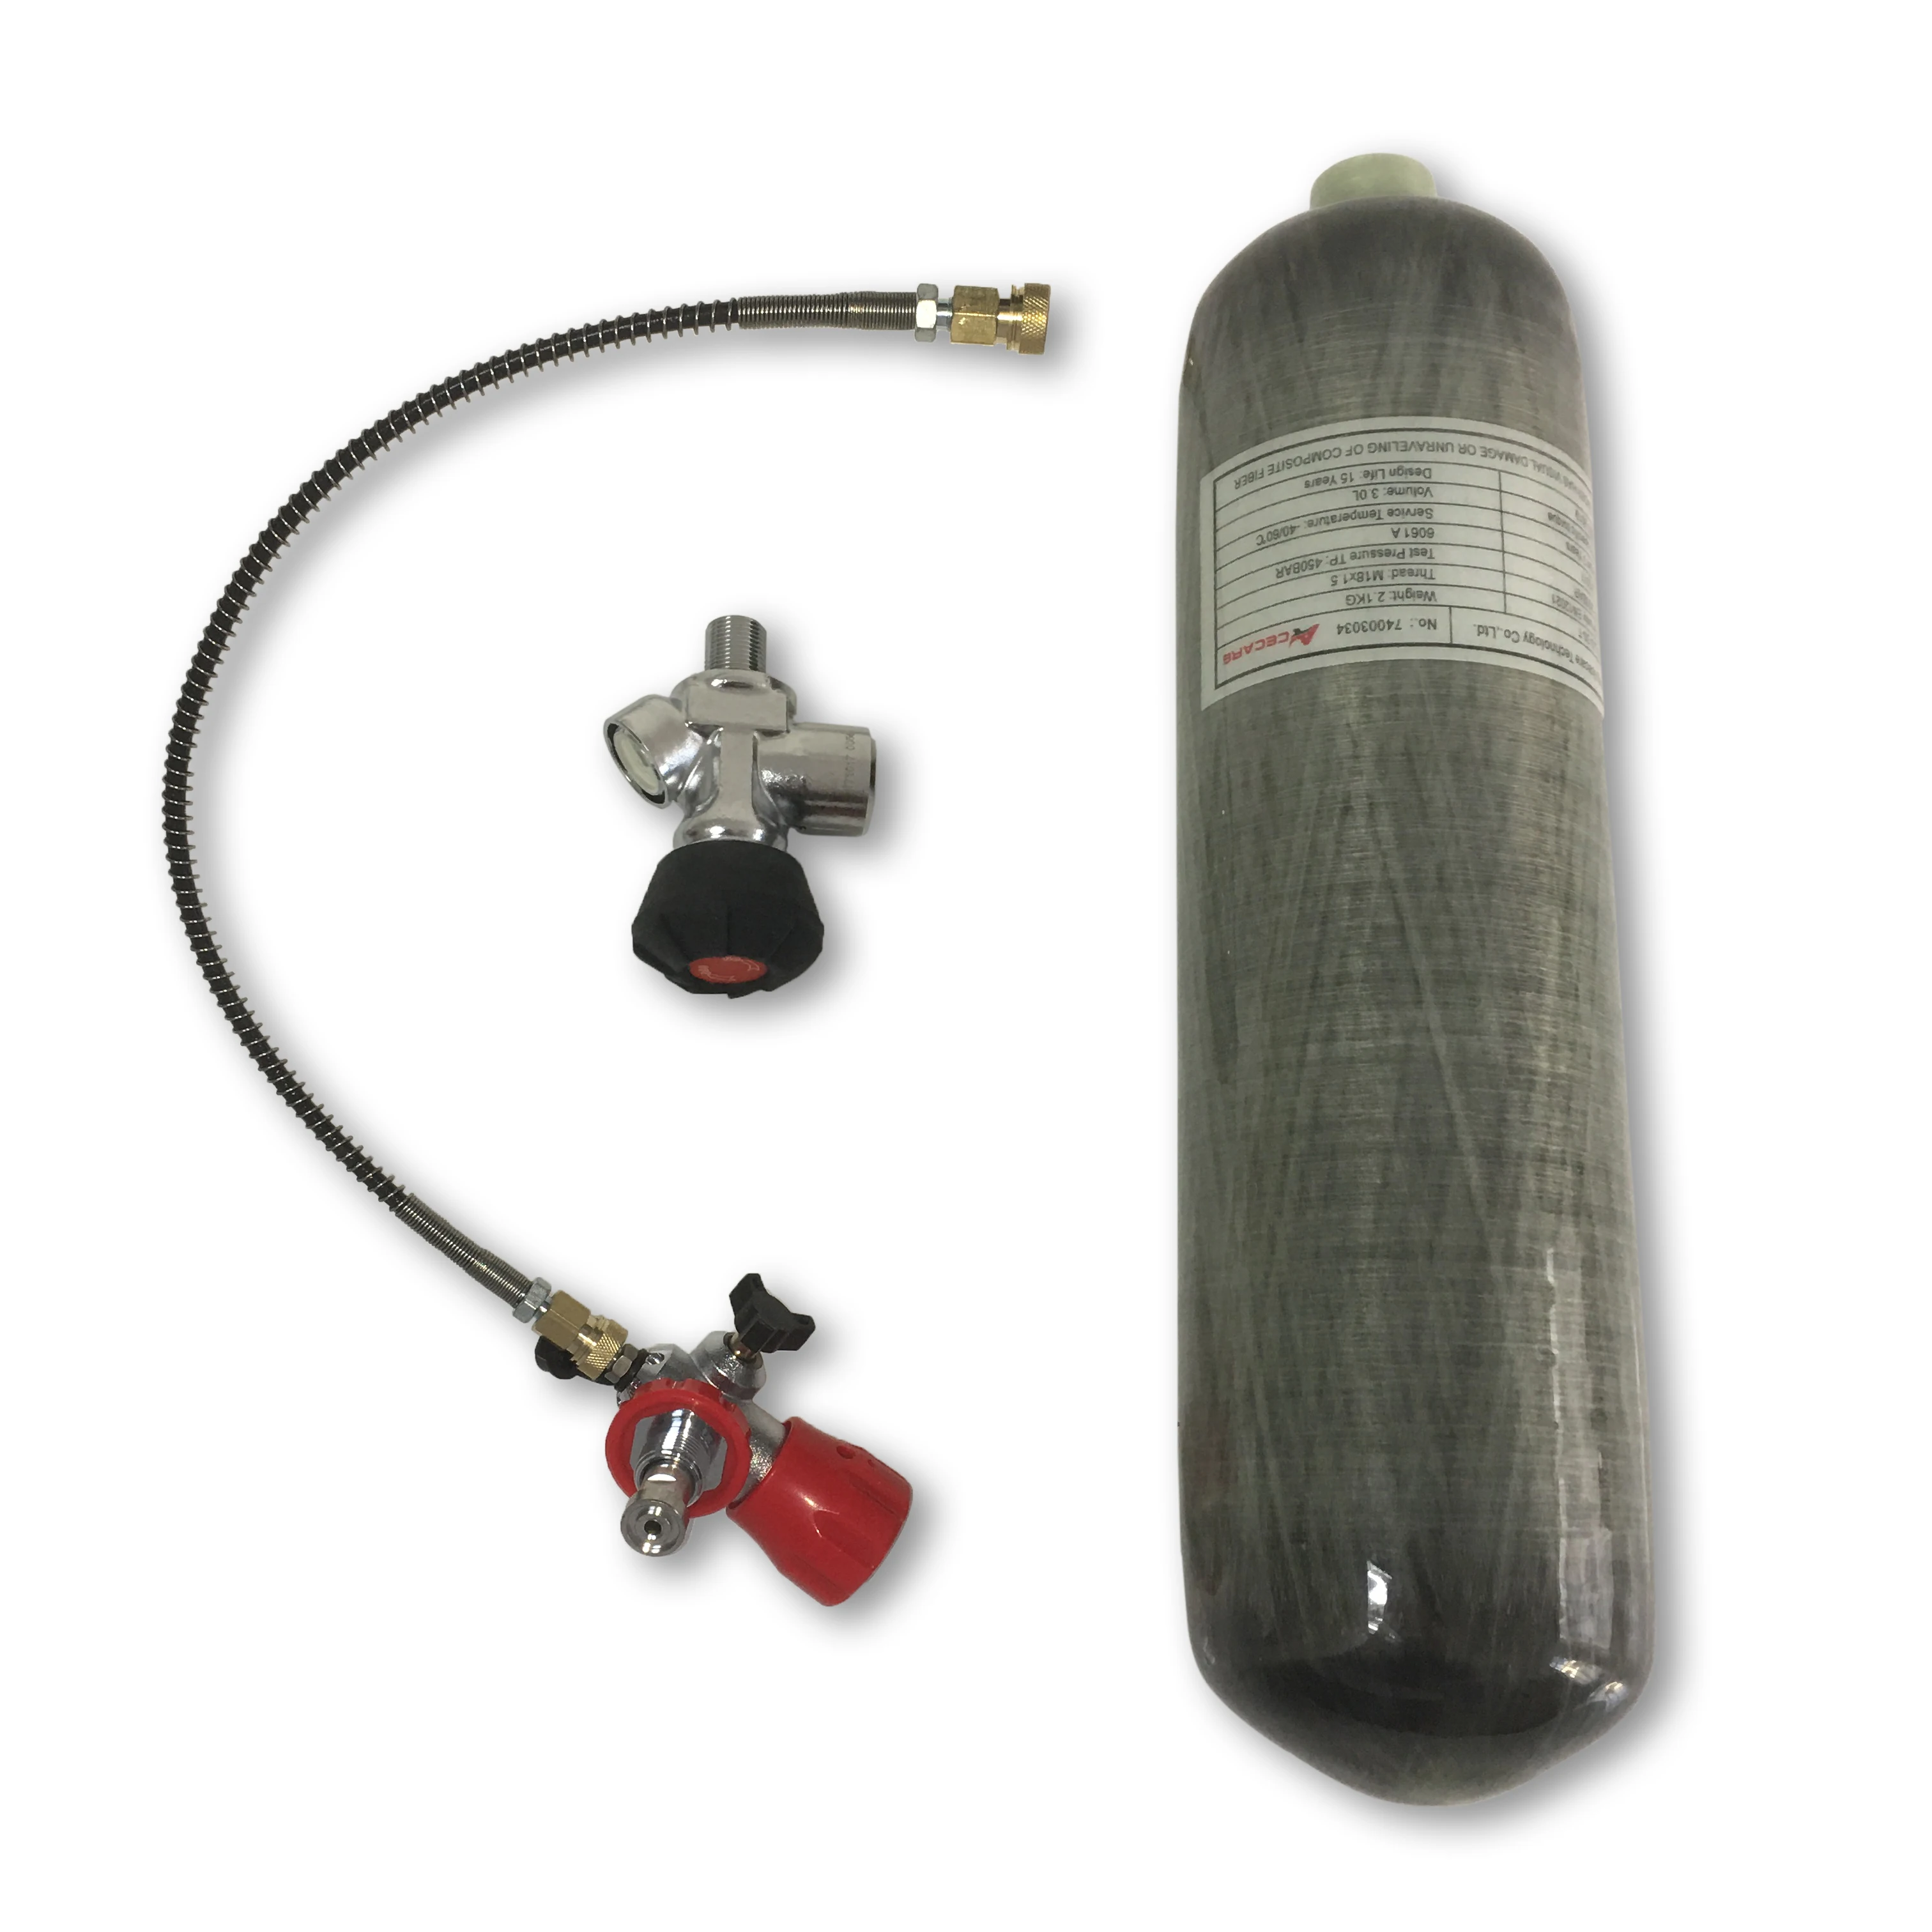 acecare 9l high pressure air tank ce 4500psi 300bar 30mpa for diving ACECARE 2L CE High Pressure Gas Air Tank 300Bar 4500Psi With Valve and Filing Station For Diving